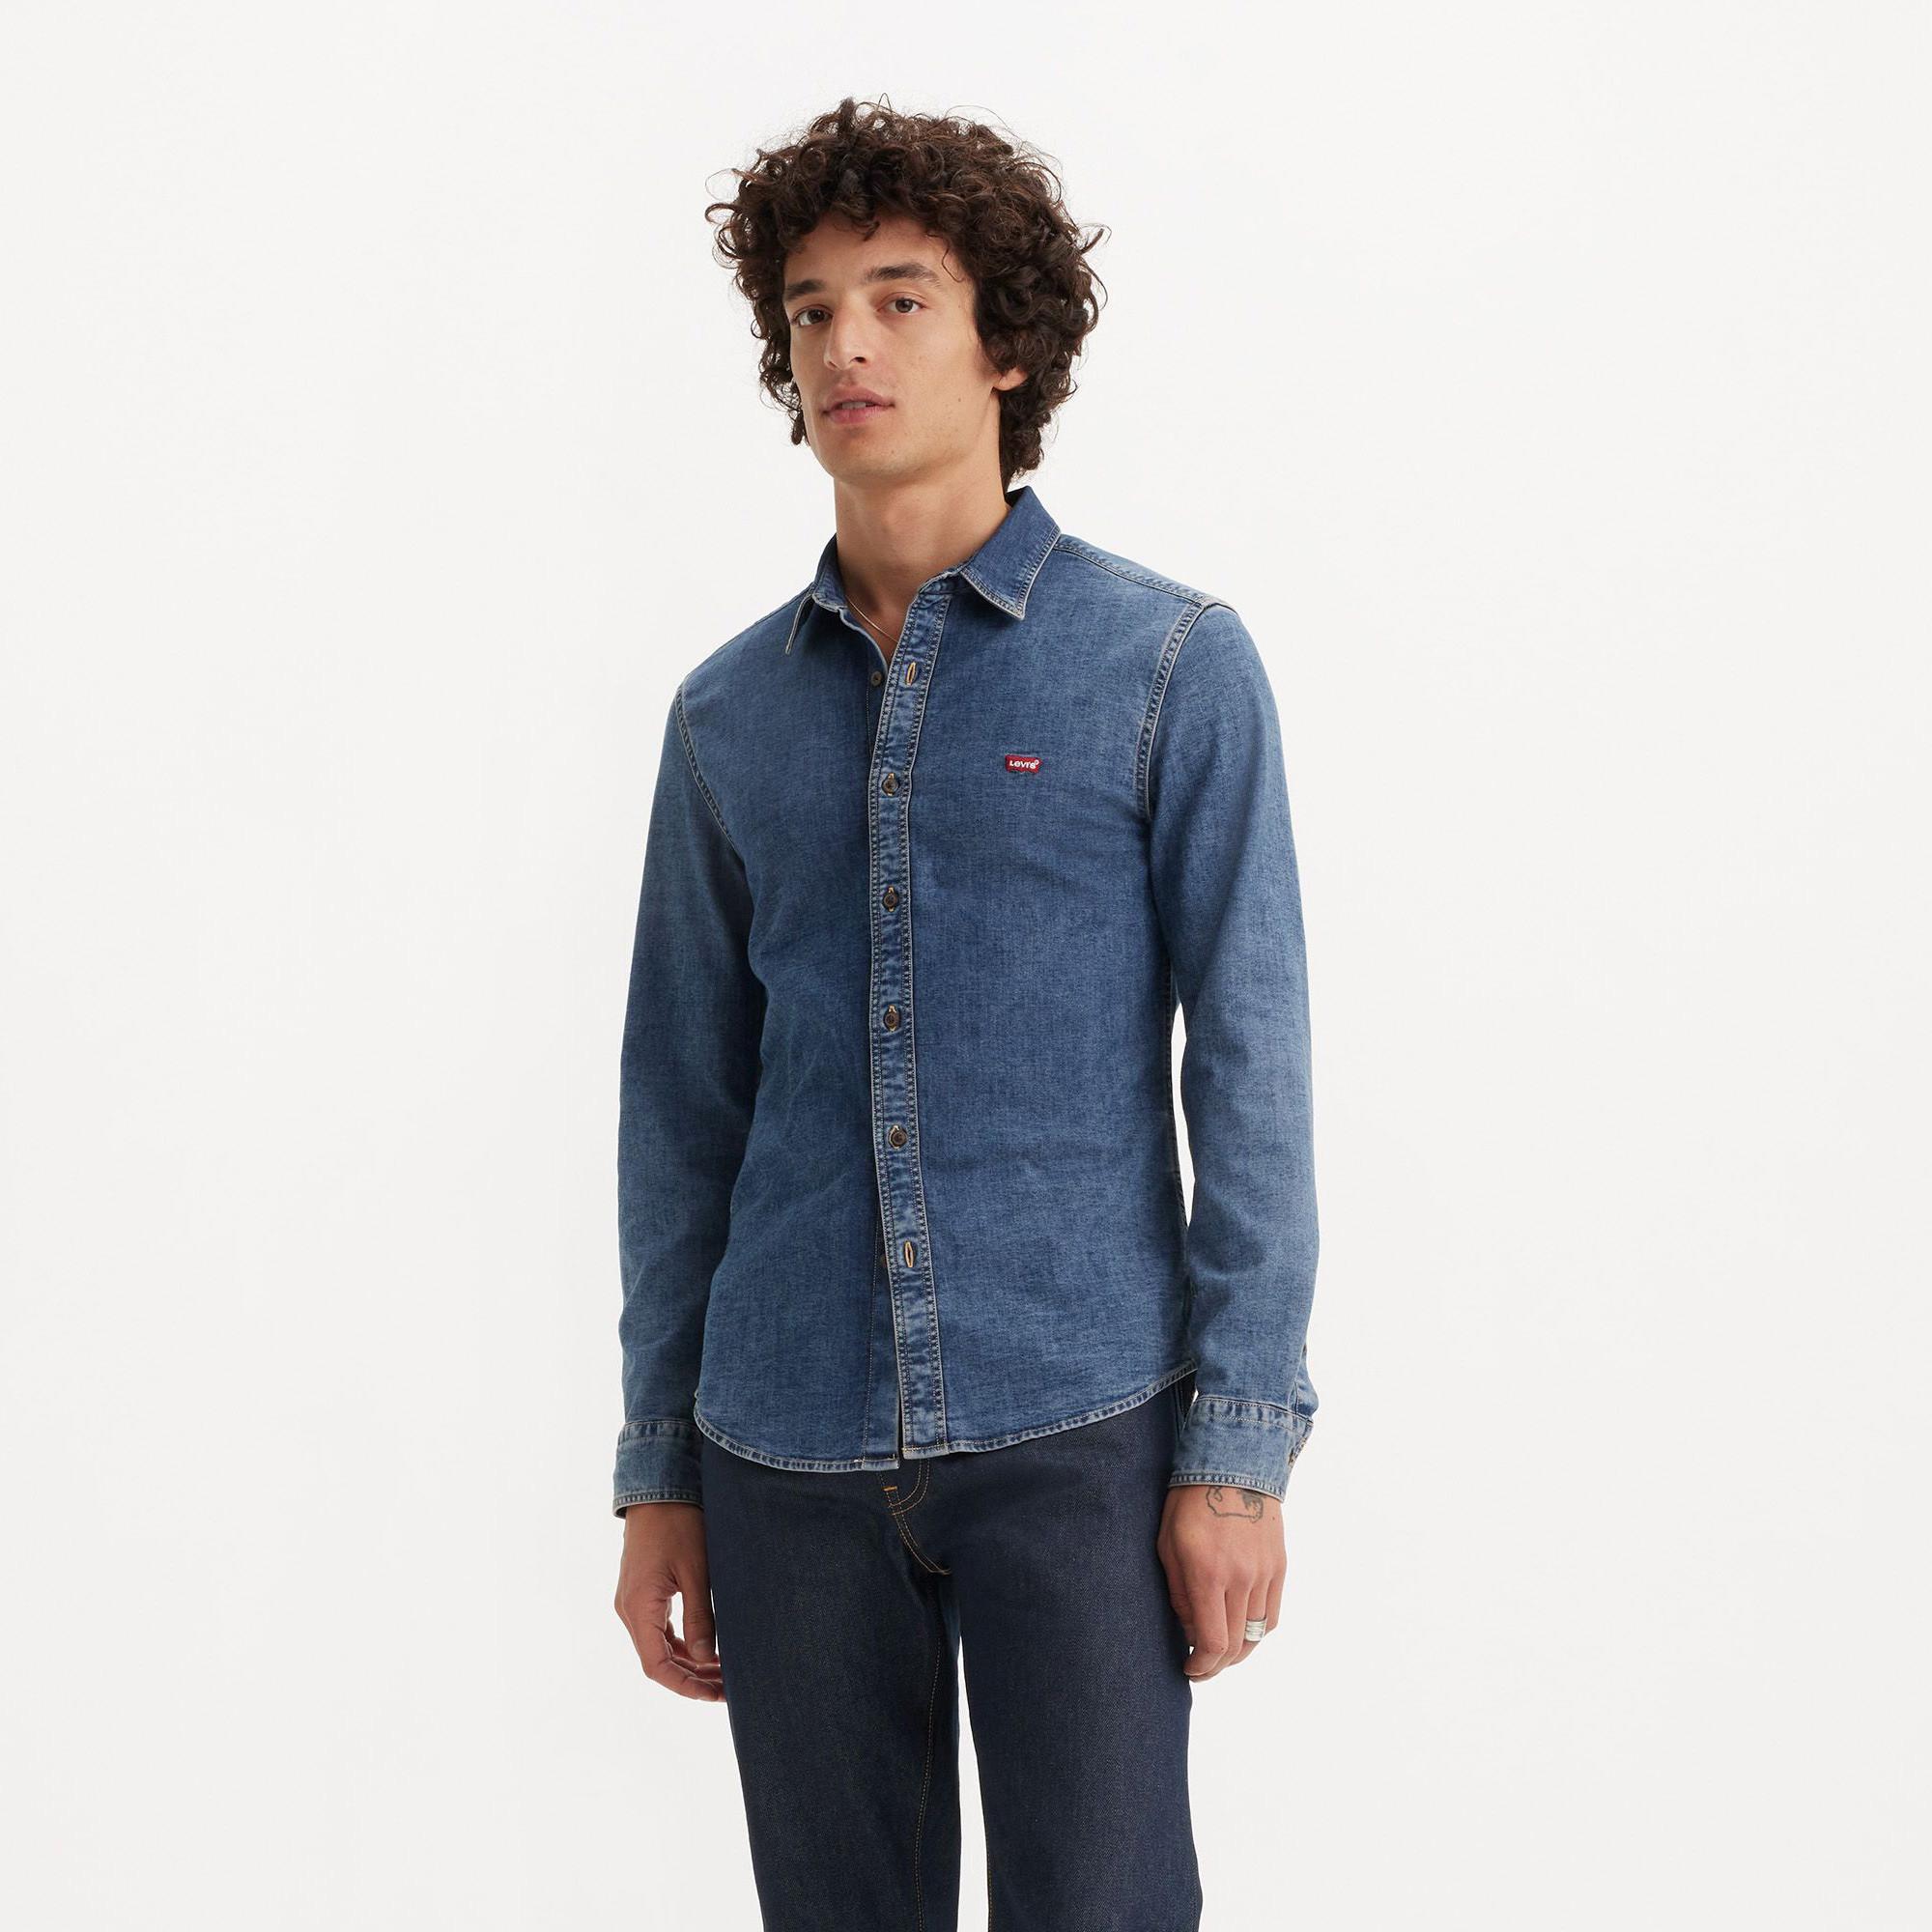 Levi's® LS BATTERY HM SHIRT SLIM MED INDIGO - WORN IN Chemise, manches longues 